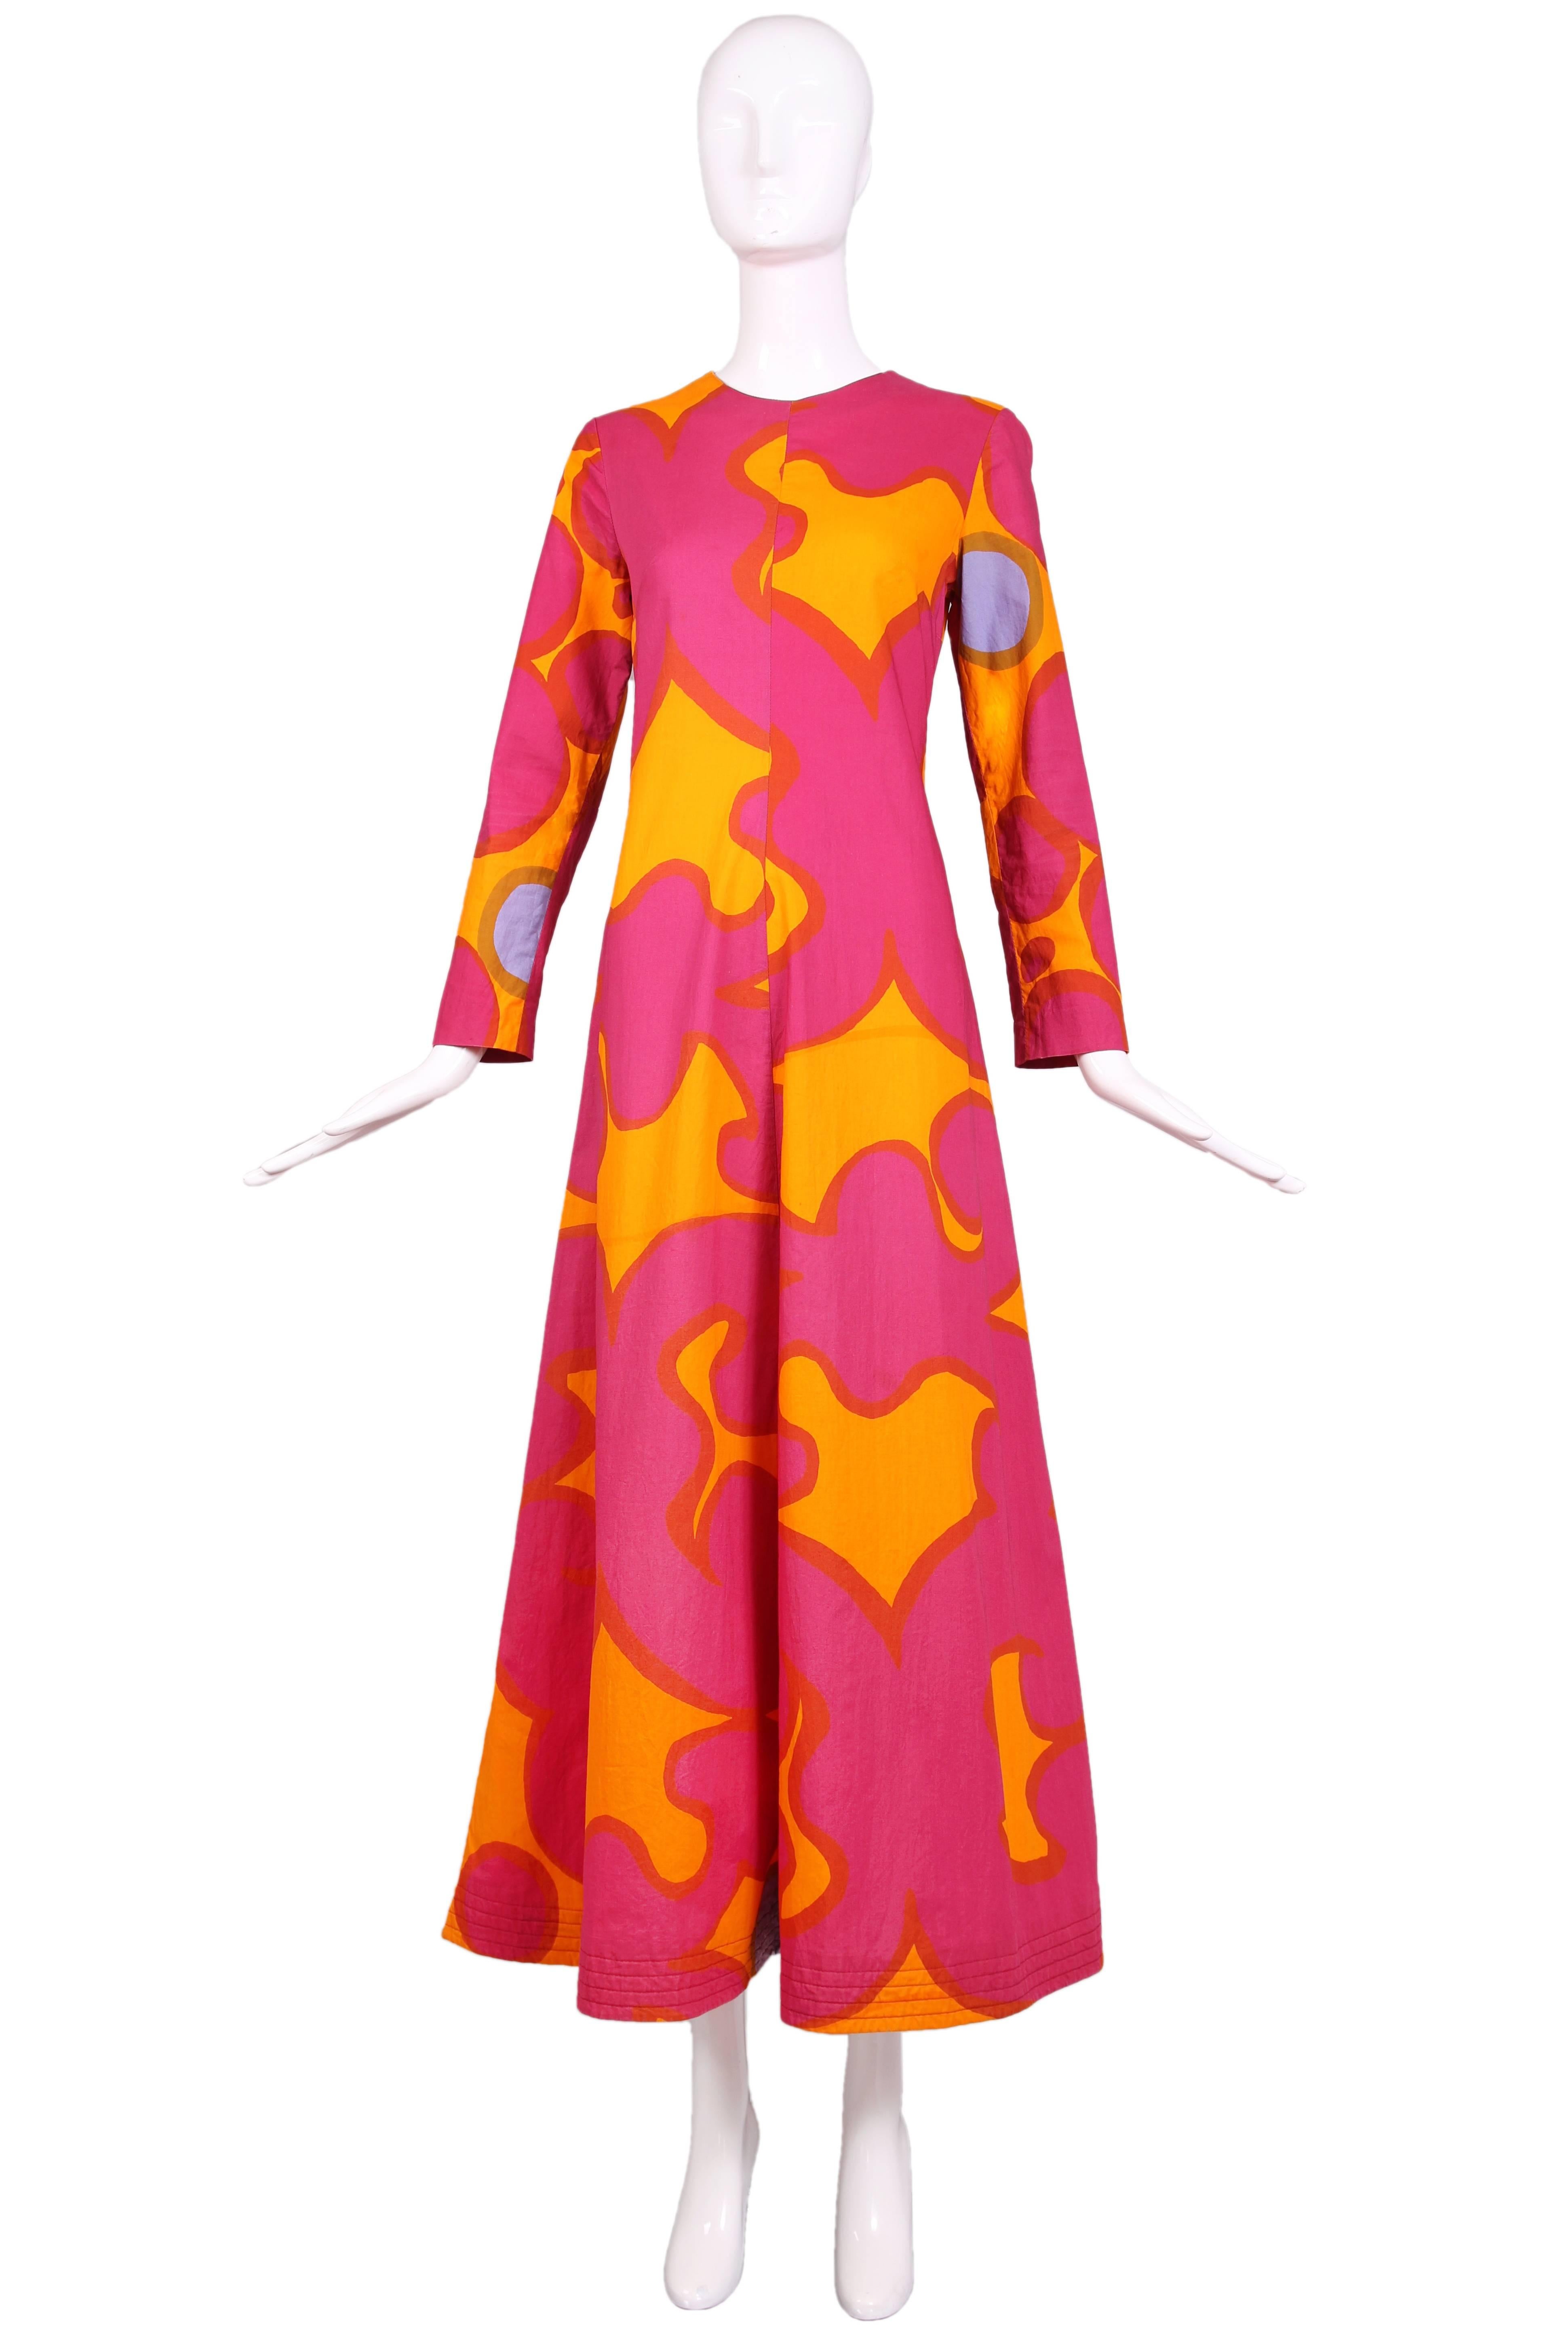 Vintage Marimekko pink and orange with splashes of purple cotton long sleeved maxi dress with large abstract print all over. Zipper back and banded quilted hem. In excellent condition. Size EU 38.
MEASUREMENTS:
Bust - 36"
Waist - 33"
Hip -